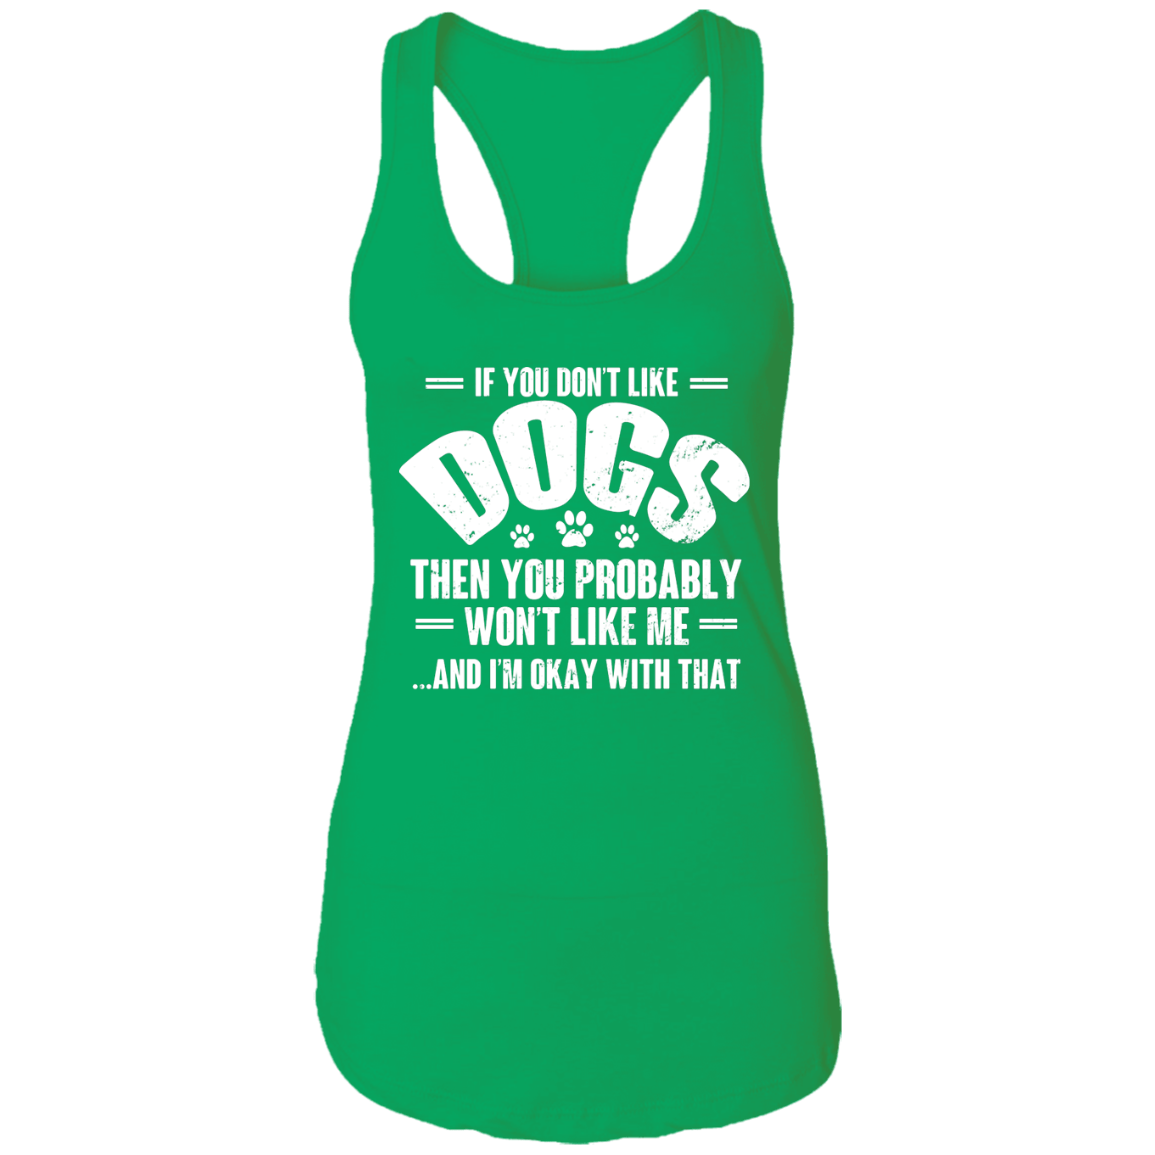 If You Don't Like Dogs - Ladies Racer Back Tank.